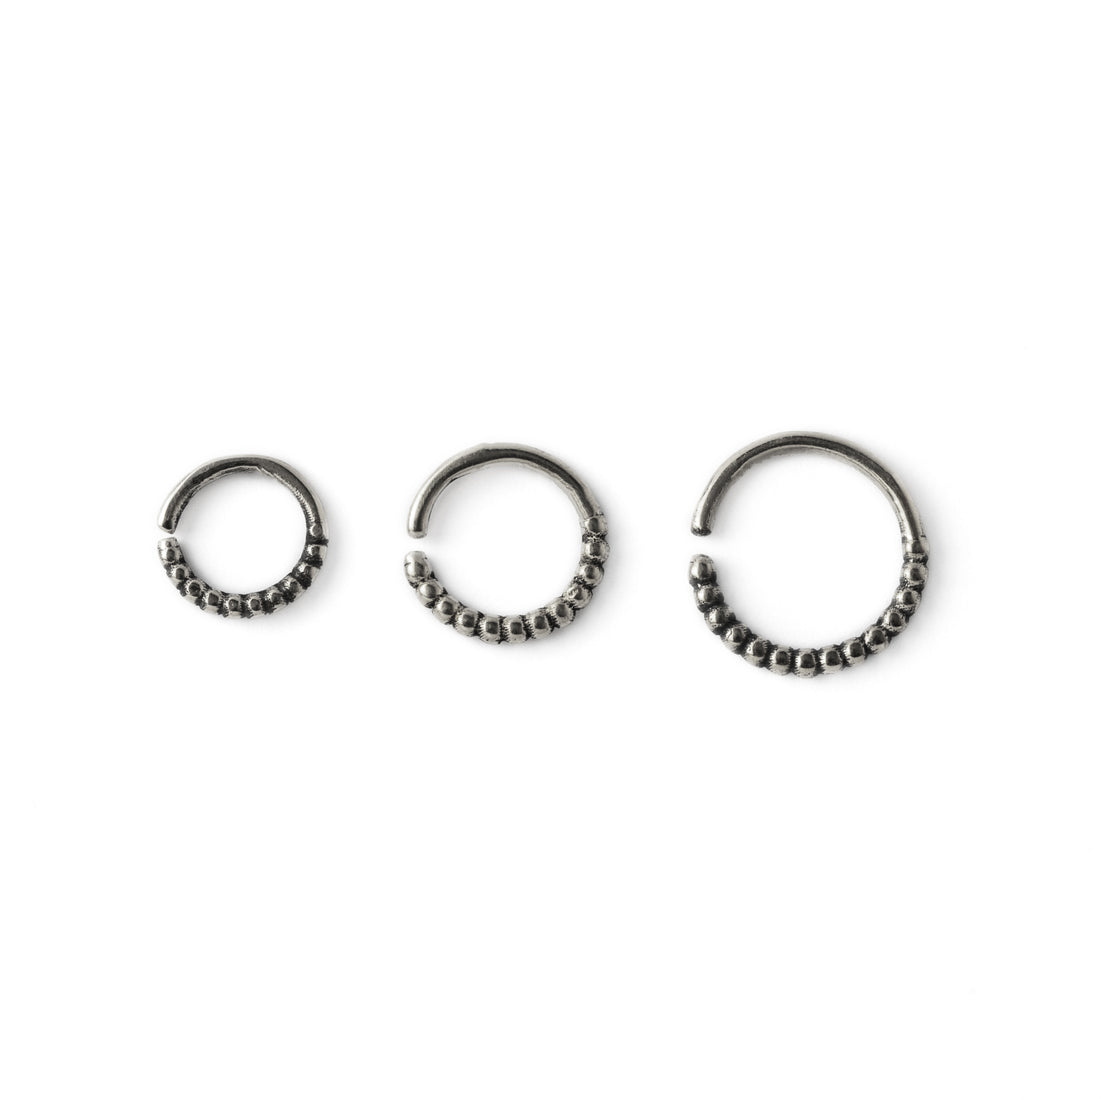 6mm, 8mm, 10mm Ravi silver septum rings frontal view